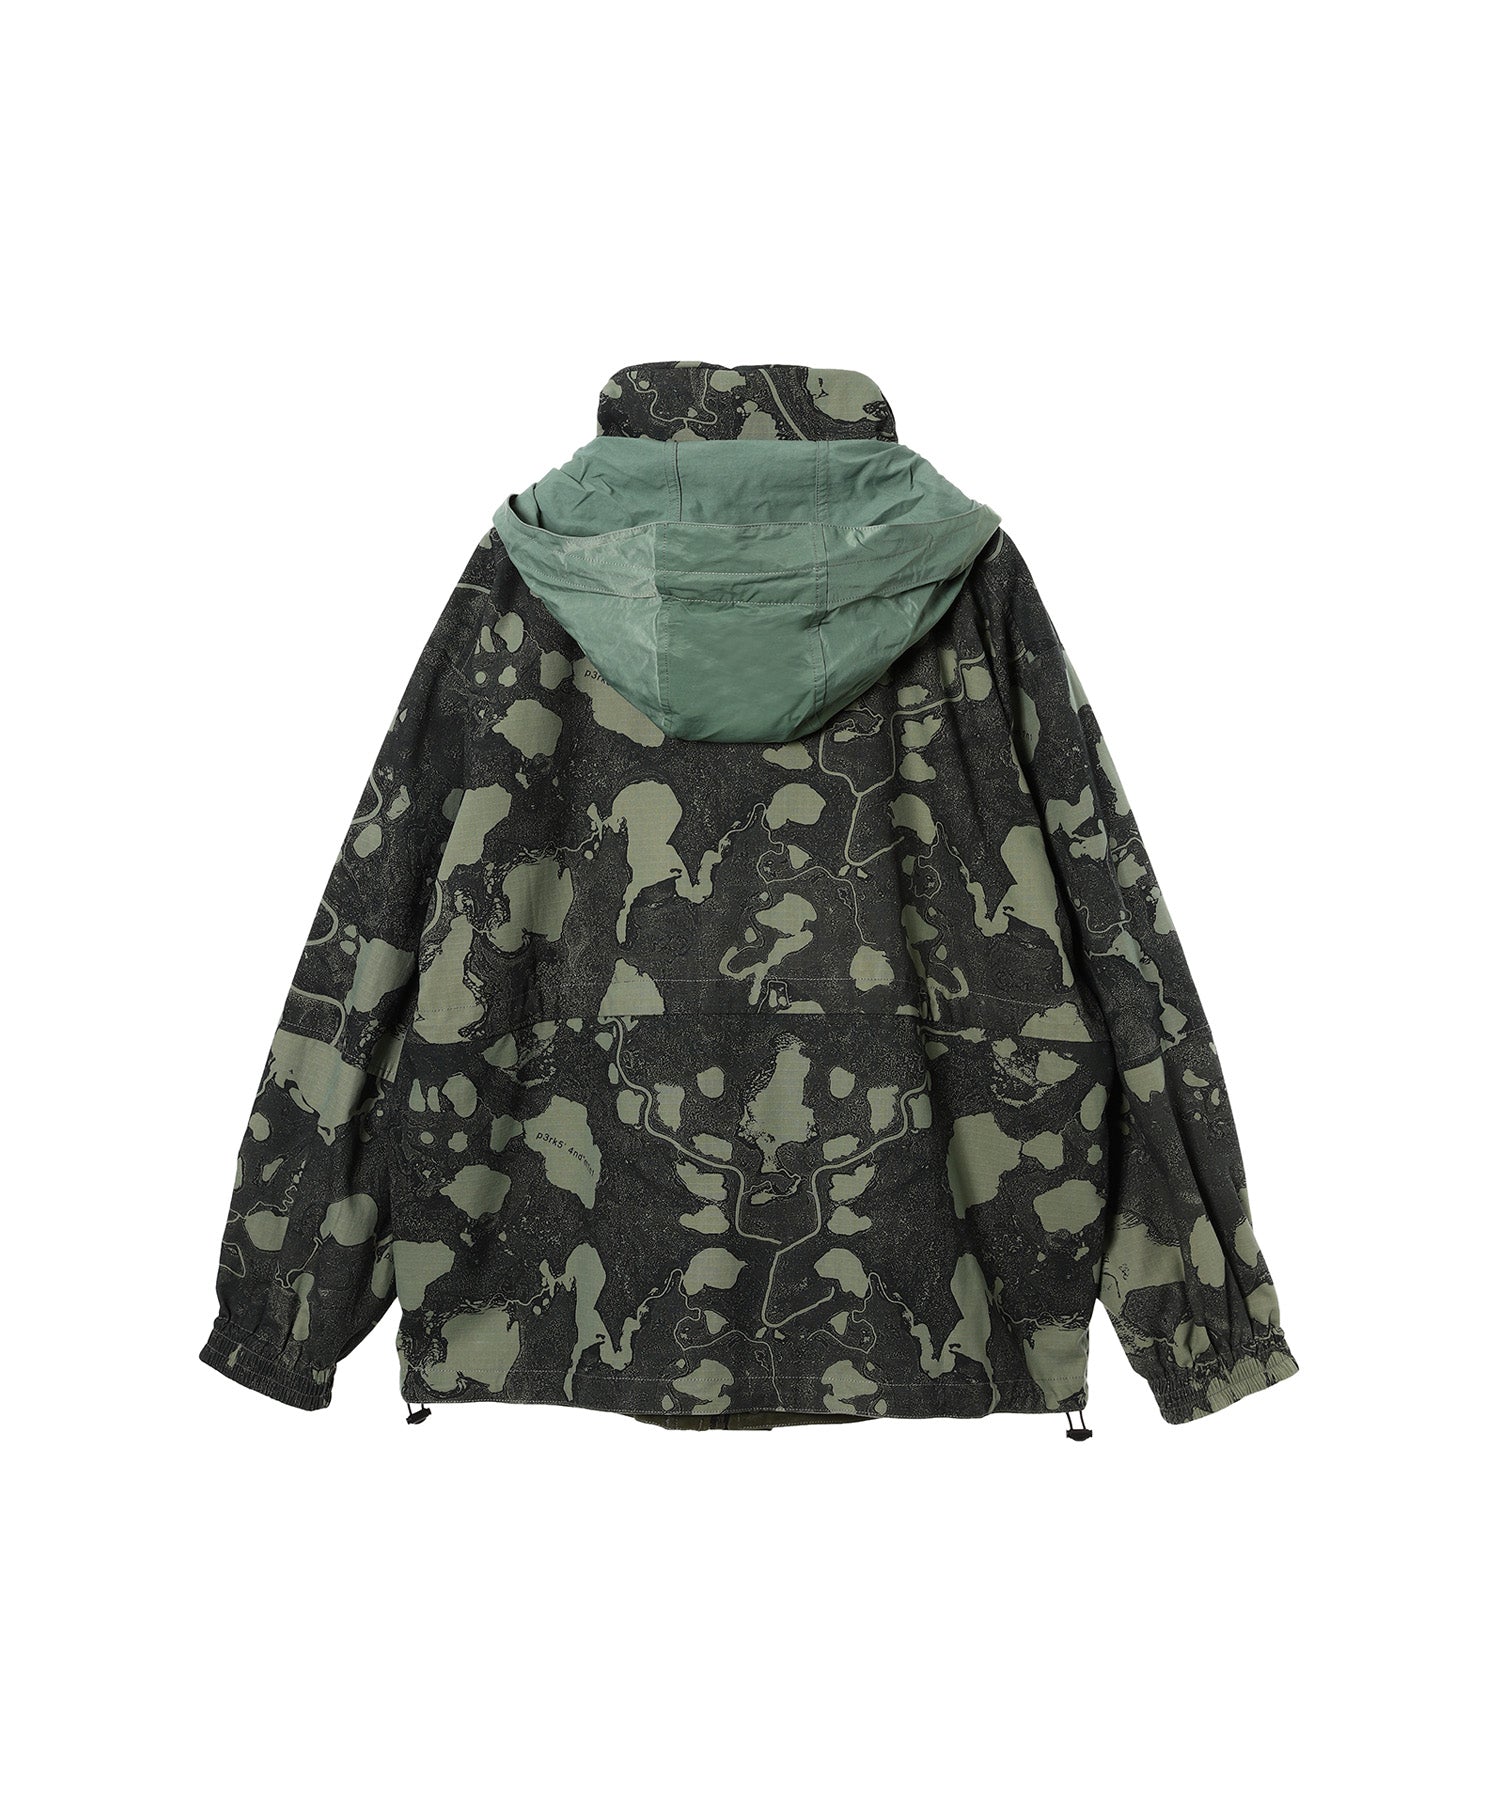 Reversible GEO Mapping Parka Jacket - P.A.M. / Perks And Mini 